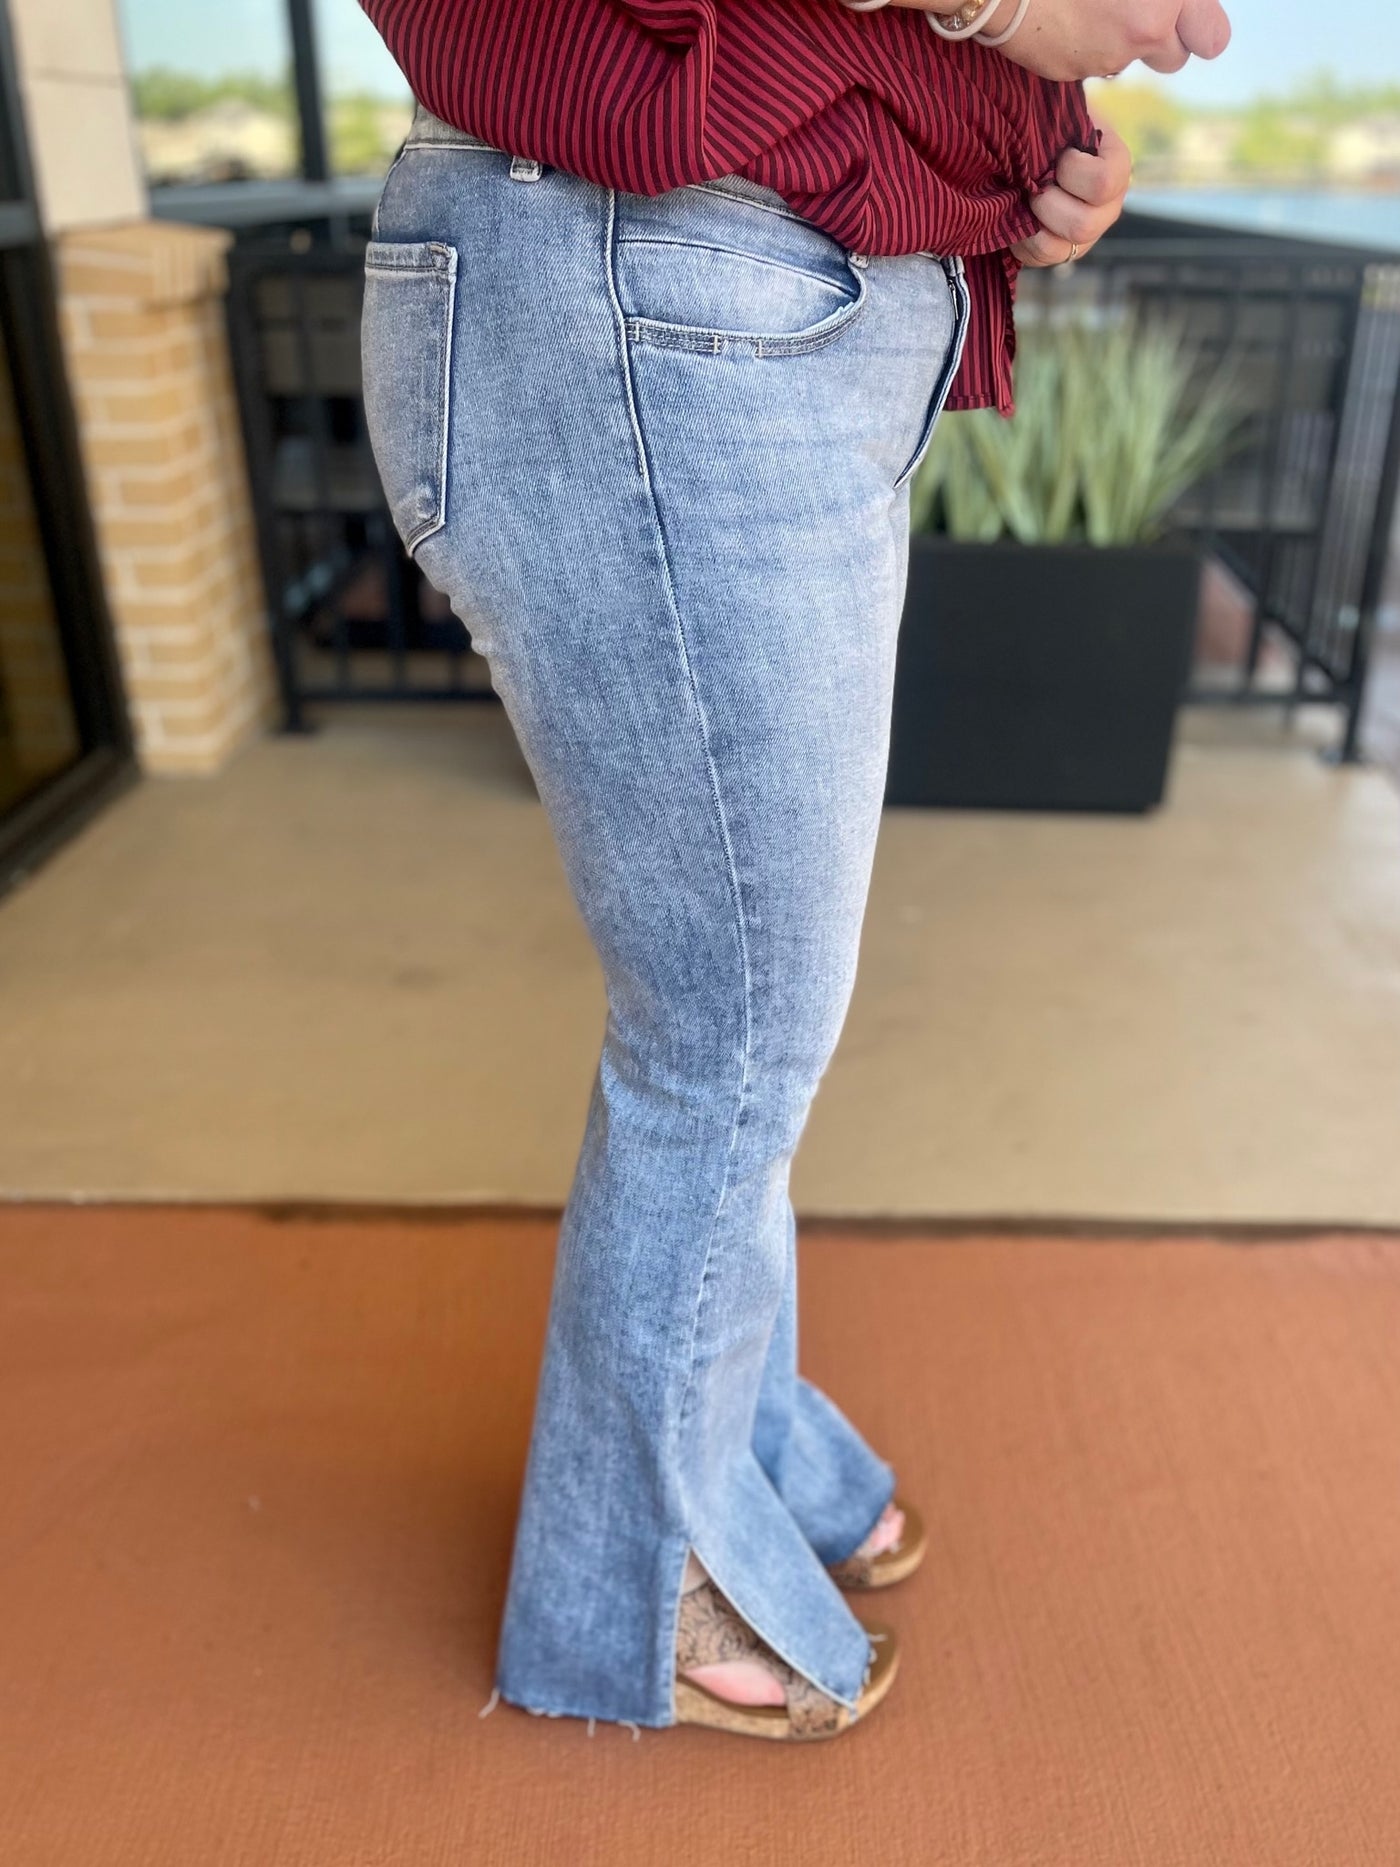 SIDE VIEW OF JEANS